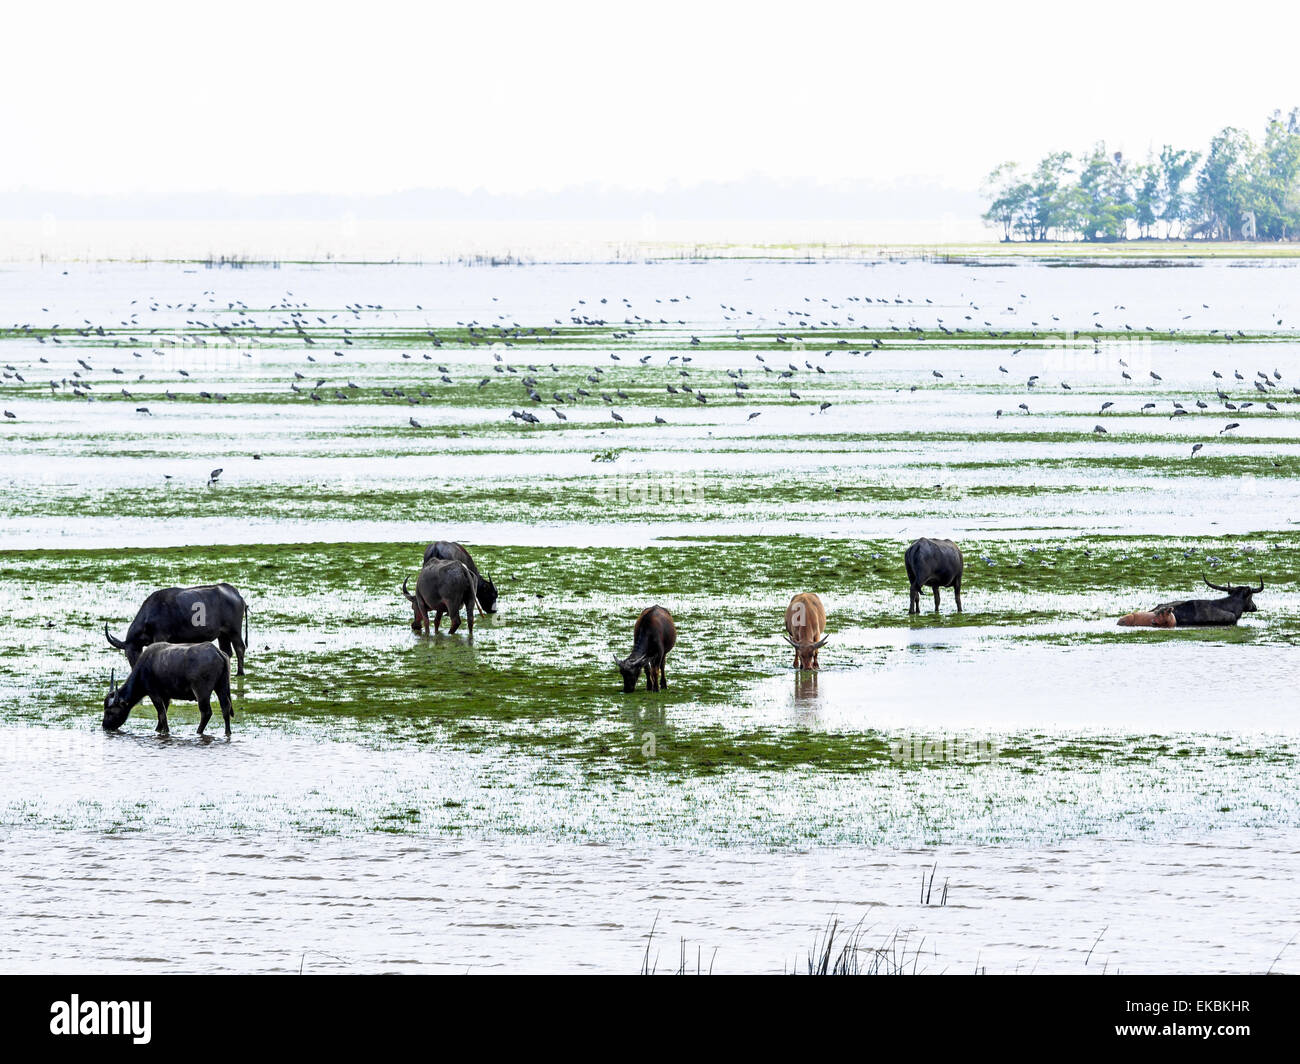 Swamp Buffaloes and Birds in Thale Noi, Phatthalung Province, Thailand Stock Photo